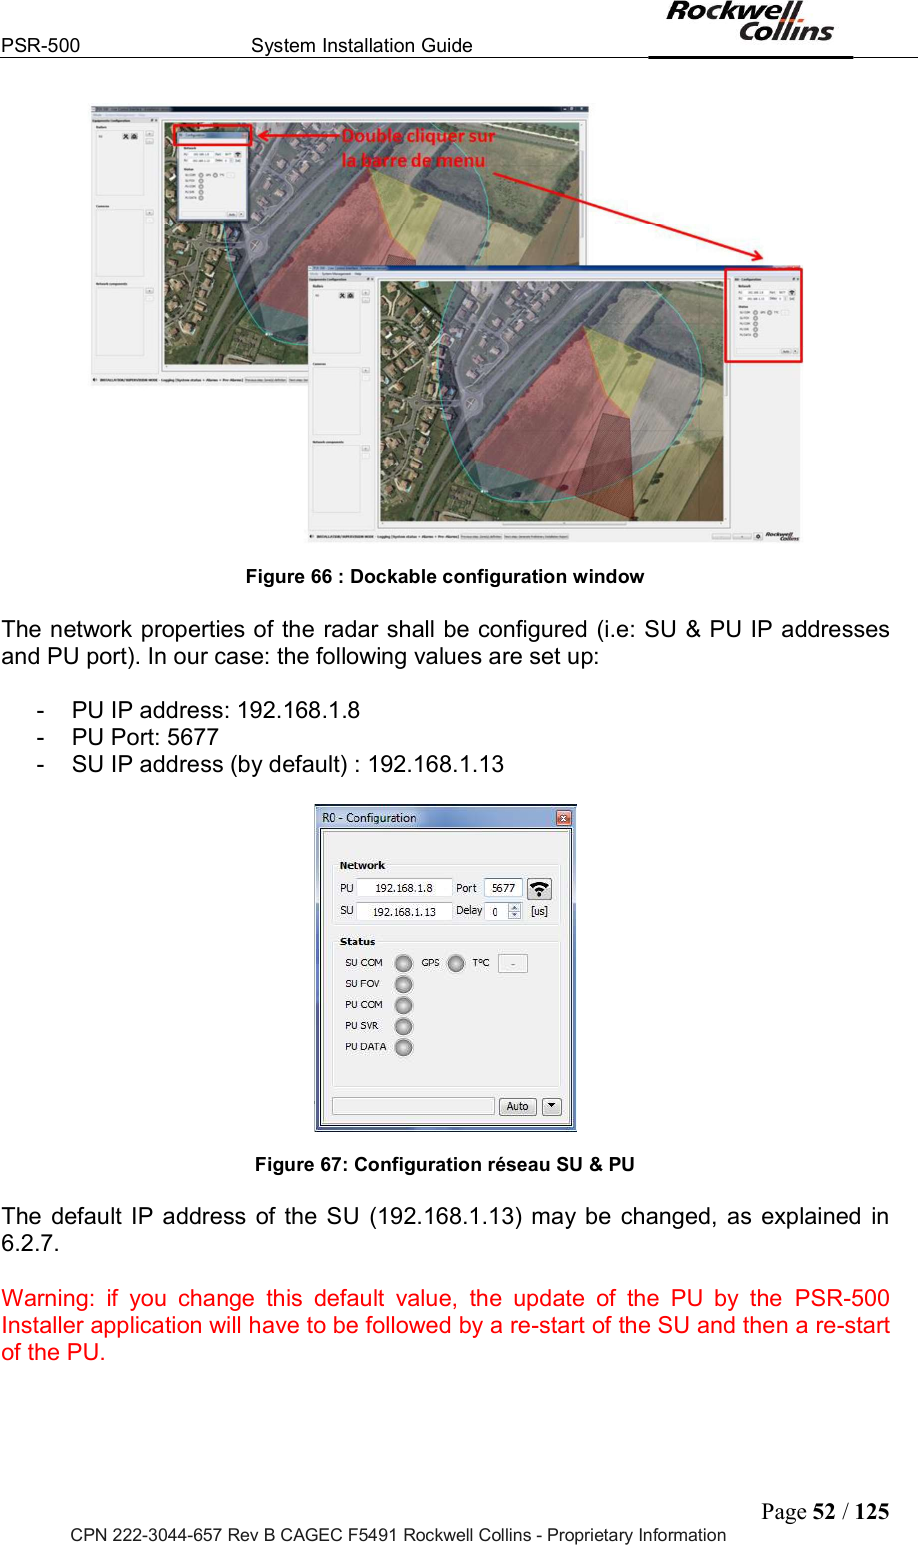 PSR-500  System Installation Guide  Page 52 / 125 CPN 222-3044-657 Rev B CAGEC F5491 Rockwell Collins - Proprietary Information   Figure 66 : Dockable configuration window   The network properties of the radar shall be configured (i.e: SU &amp; PU IP addresses and PU port). In our case: the following values are set up:  -  PU IP address: 192.168.1.8 -  PU Port: 5677 -  SU IP address (by default) : 192.168.1.13    Figure 67: Configuration réseau SU &amp; PU  The  default  IP  address of the  SU (192.168.1.13)  may  be  changed,  as  explained  in 6.2.7.   Warning:  if  you  change  this  default  value,  the  update  of  the  PU  by  the  PSR-500 Installer application will have to be followed by a re-start of the SU and then a re-start of the PU.   